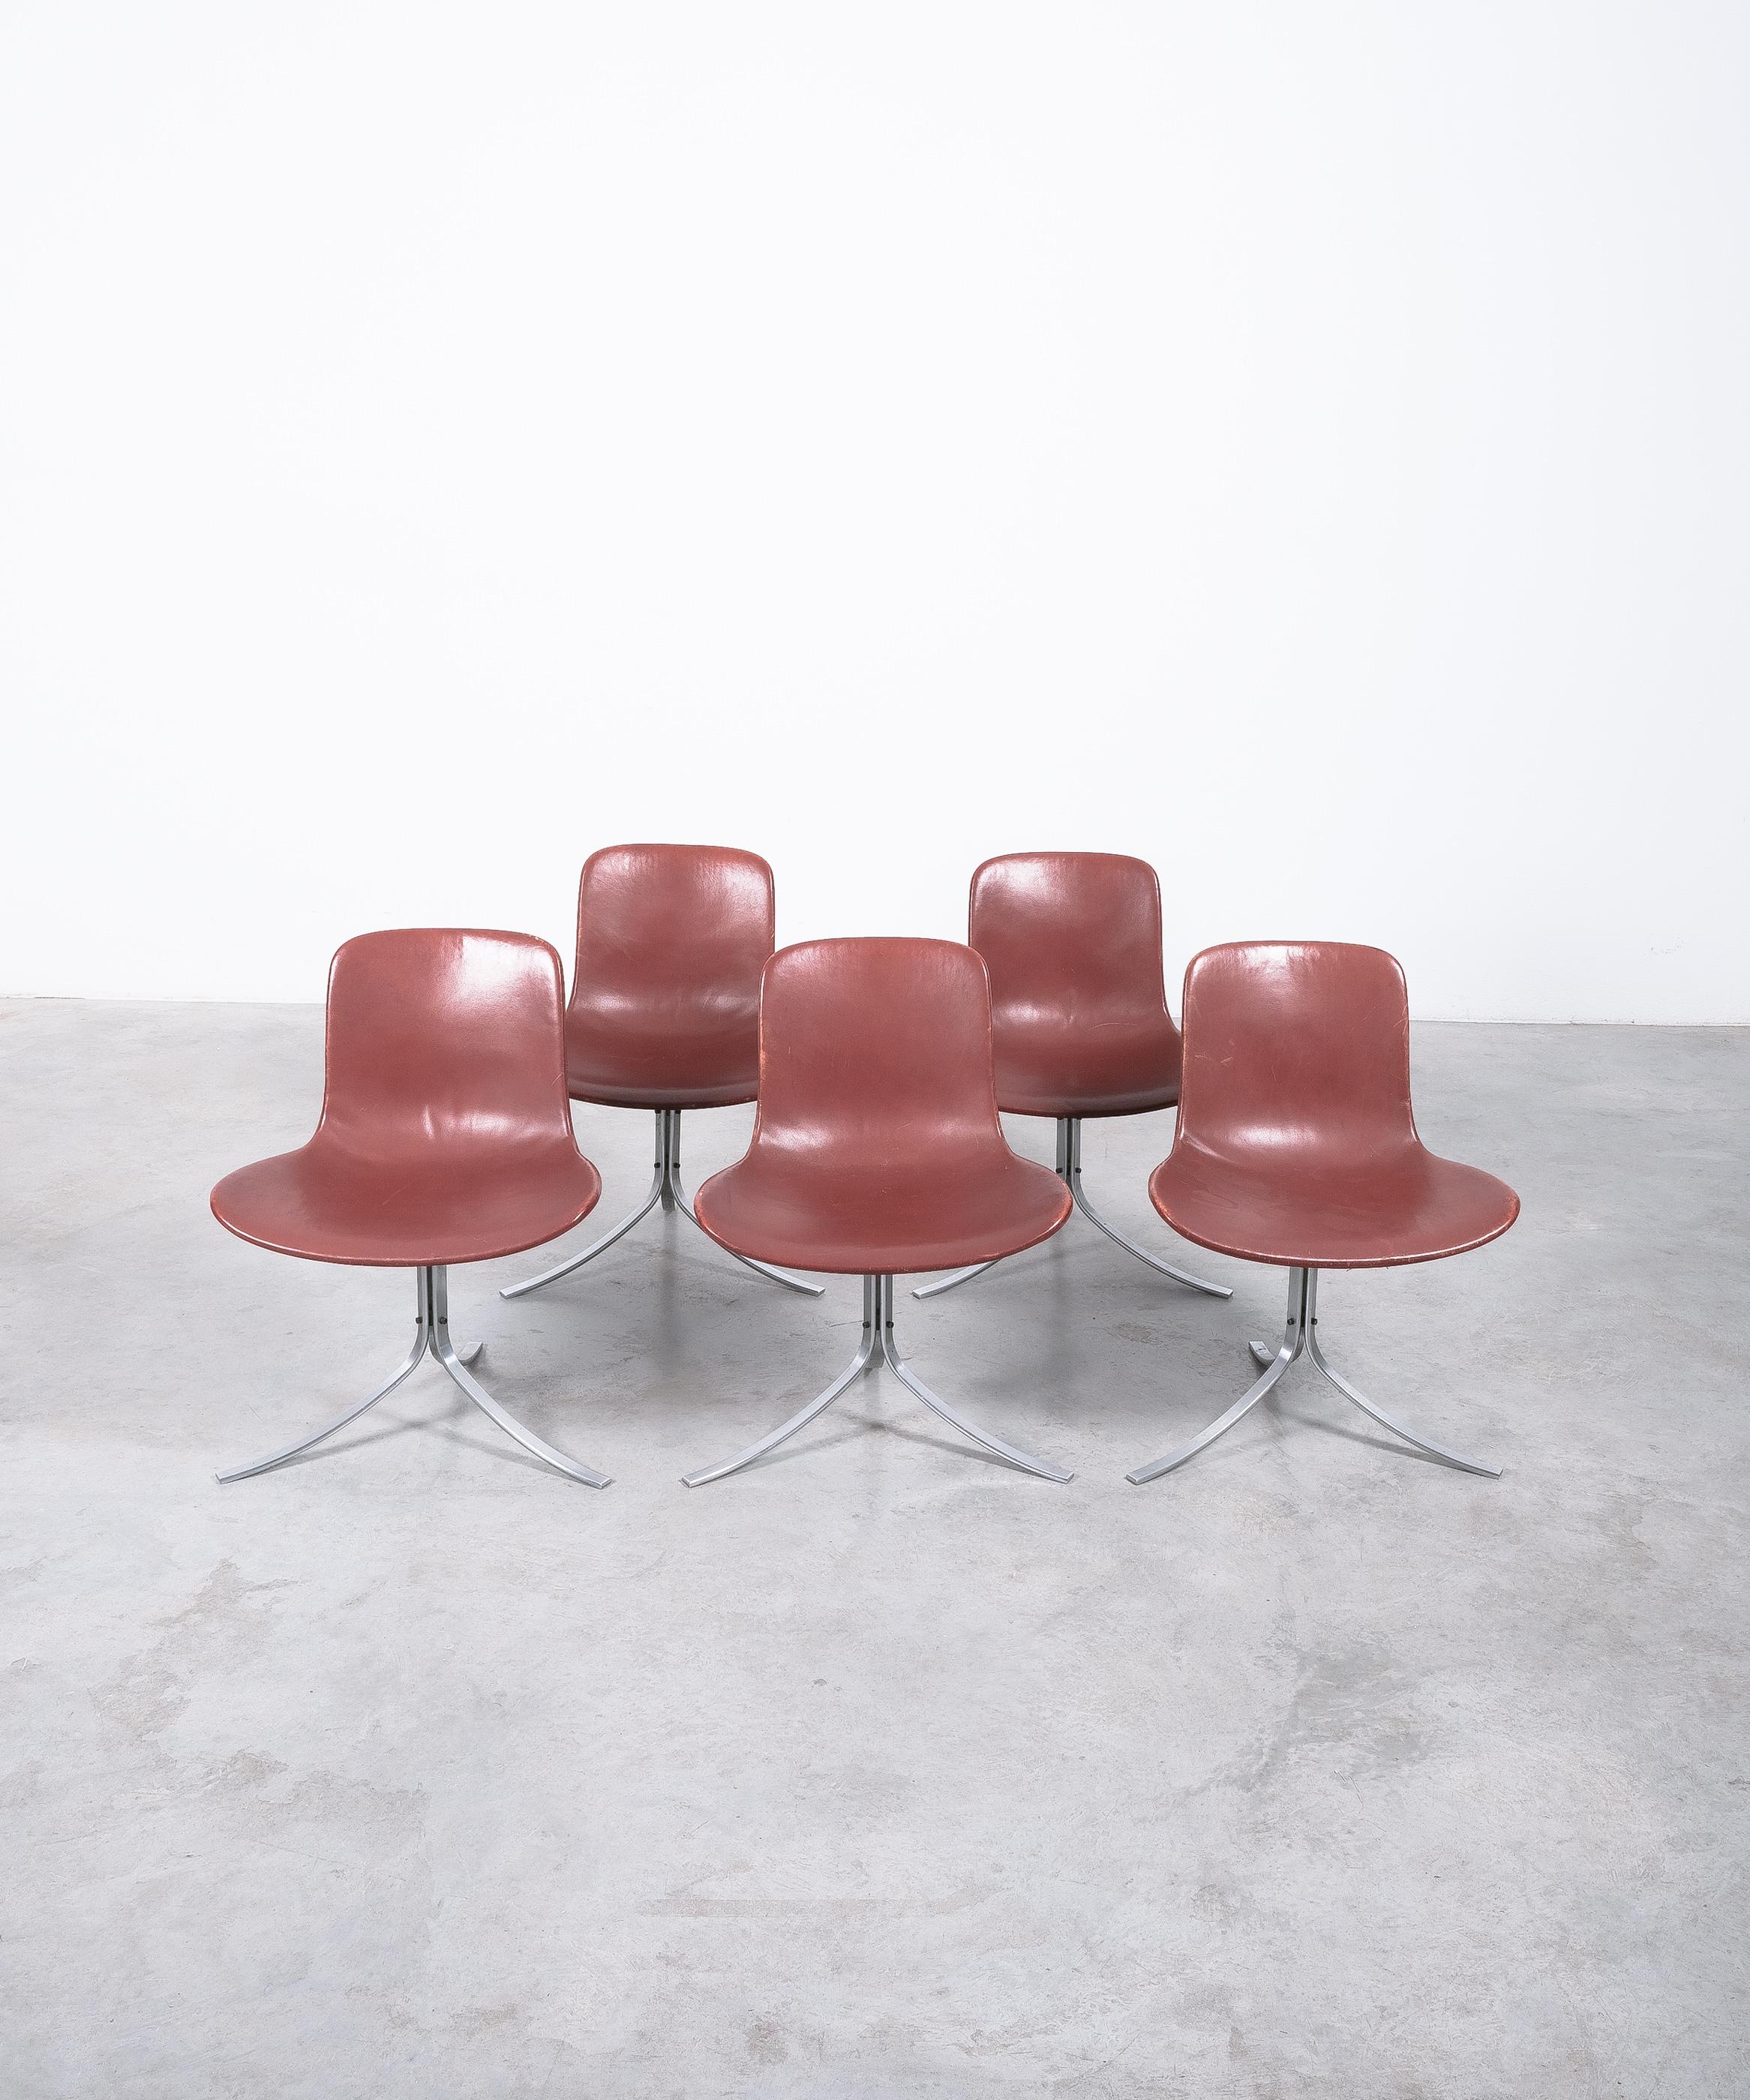 Brushed Poul Kjærholm PK-9 Dining Chairs by E. Kold Christensen Brown Leather, Denmark For Sale